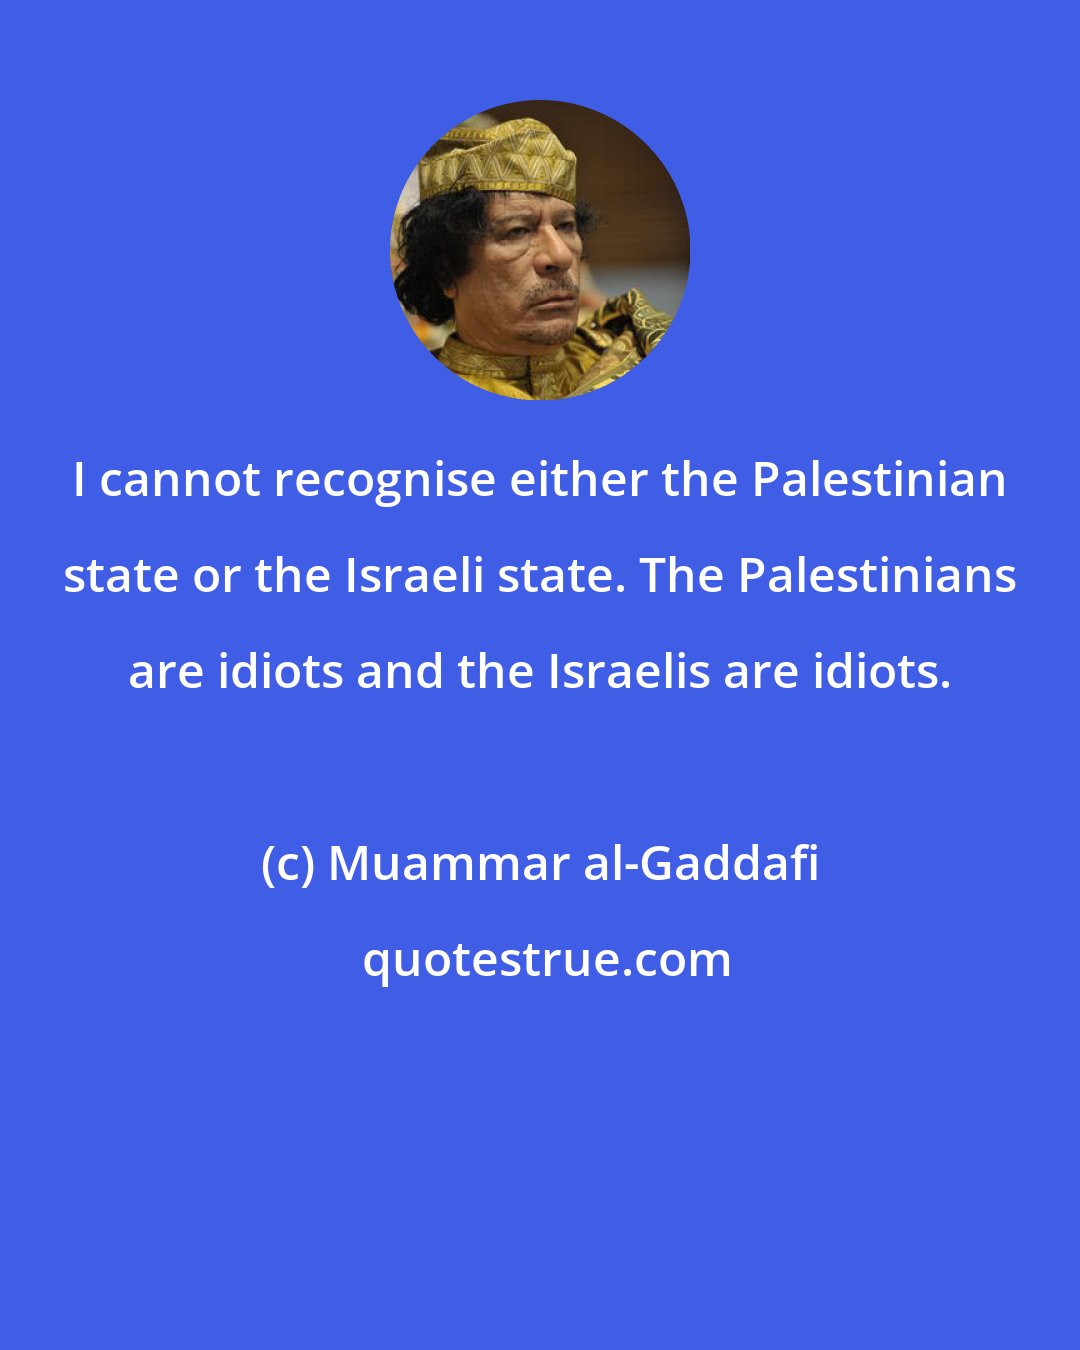 Muammar al-Gaddafi: I cannot recognise either the Palestinian state or the Israeli state. The Palestinians are idiots and the Israelis are idiots.